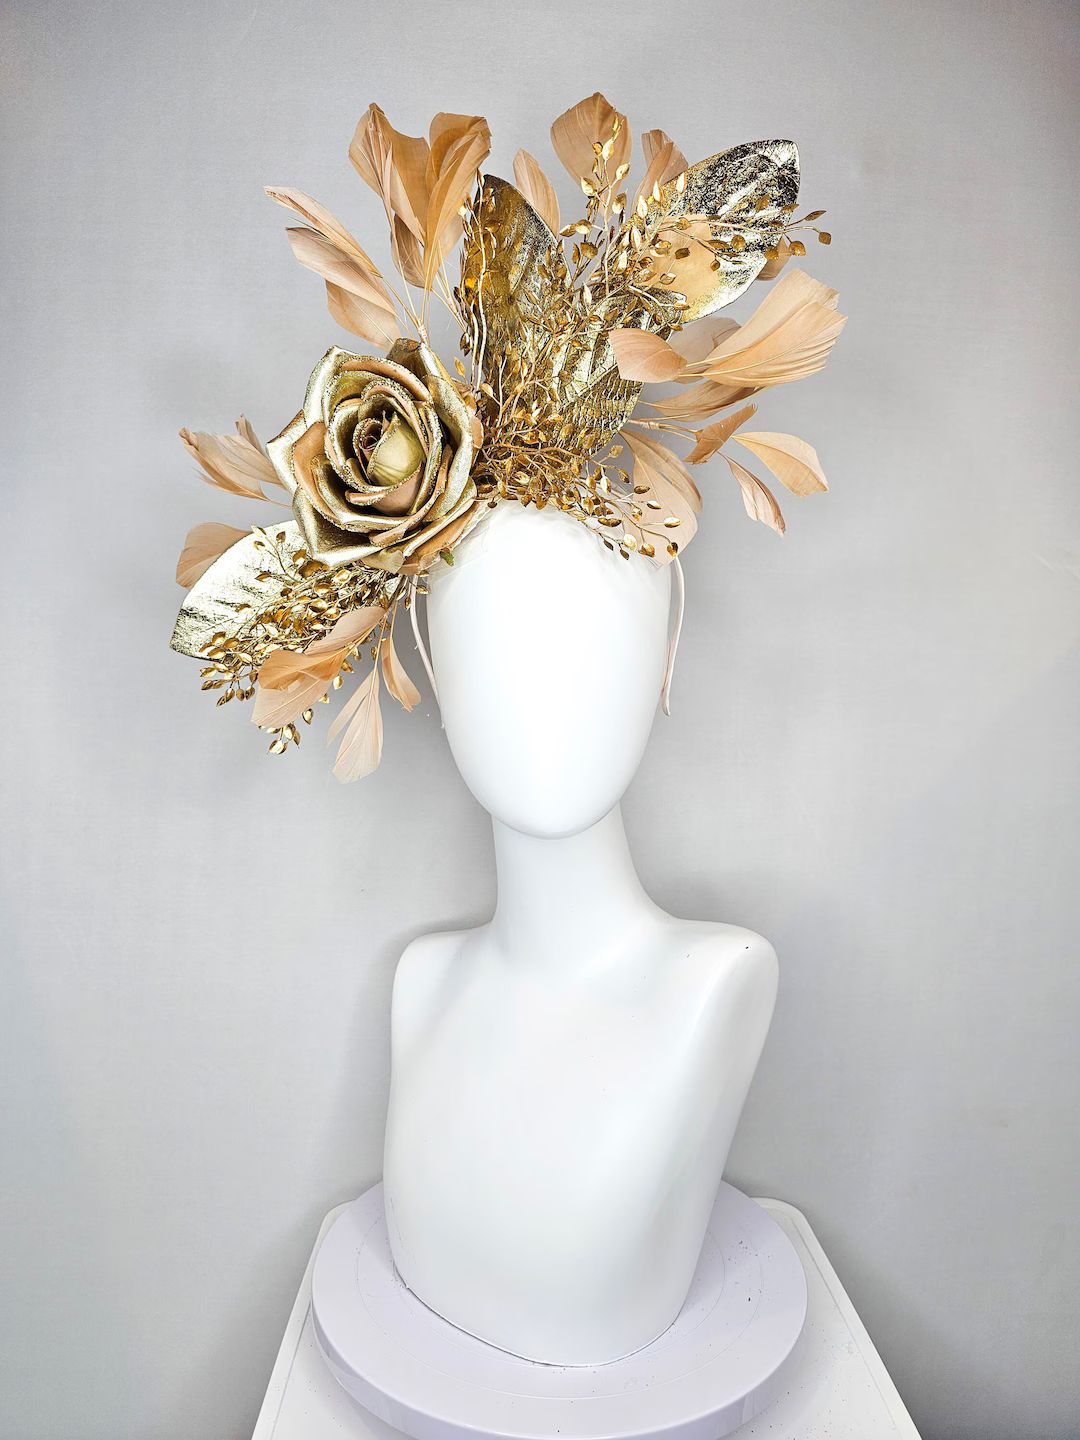 Kentucky Derby Hat Fascinator Gold Feathers and Gold Rose Flower With Gold Leaves - Etsy | Etsy (US)